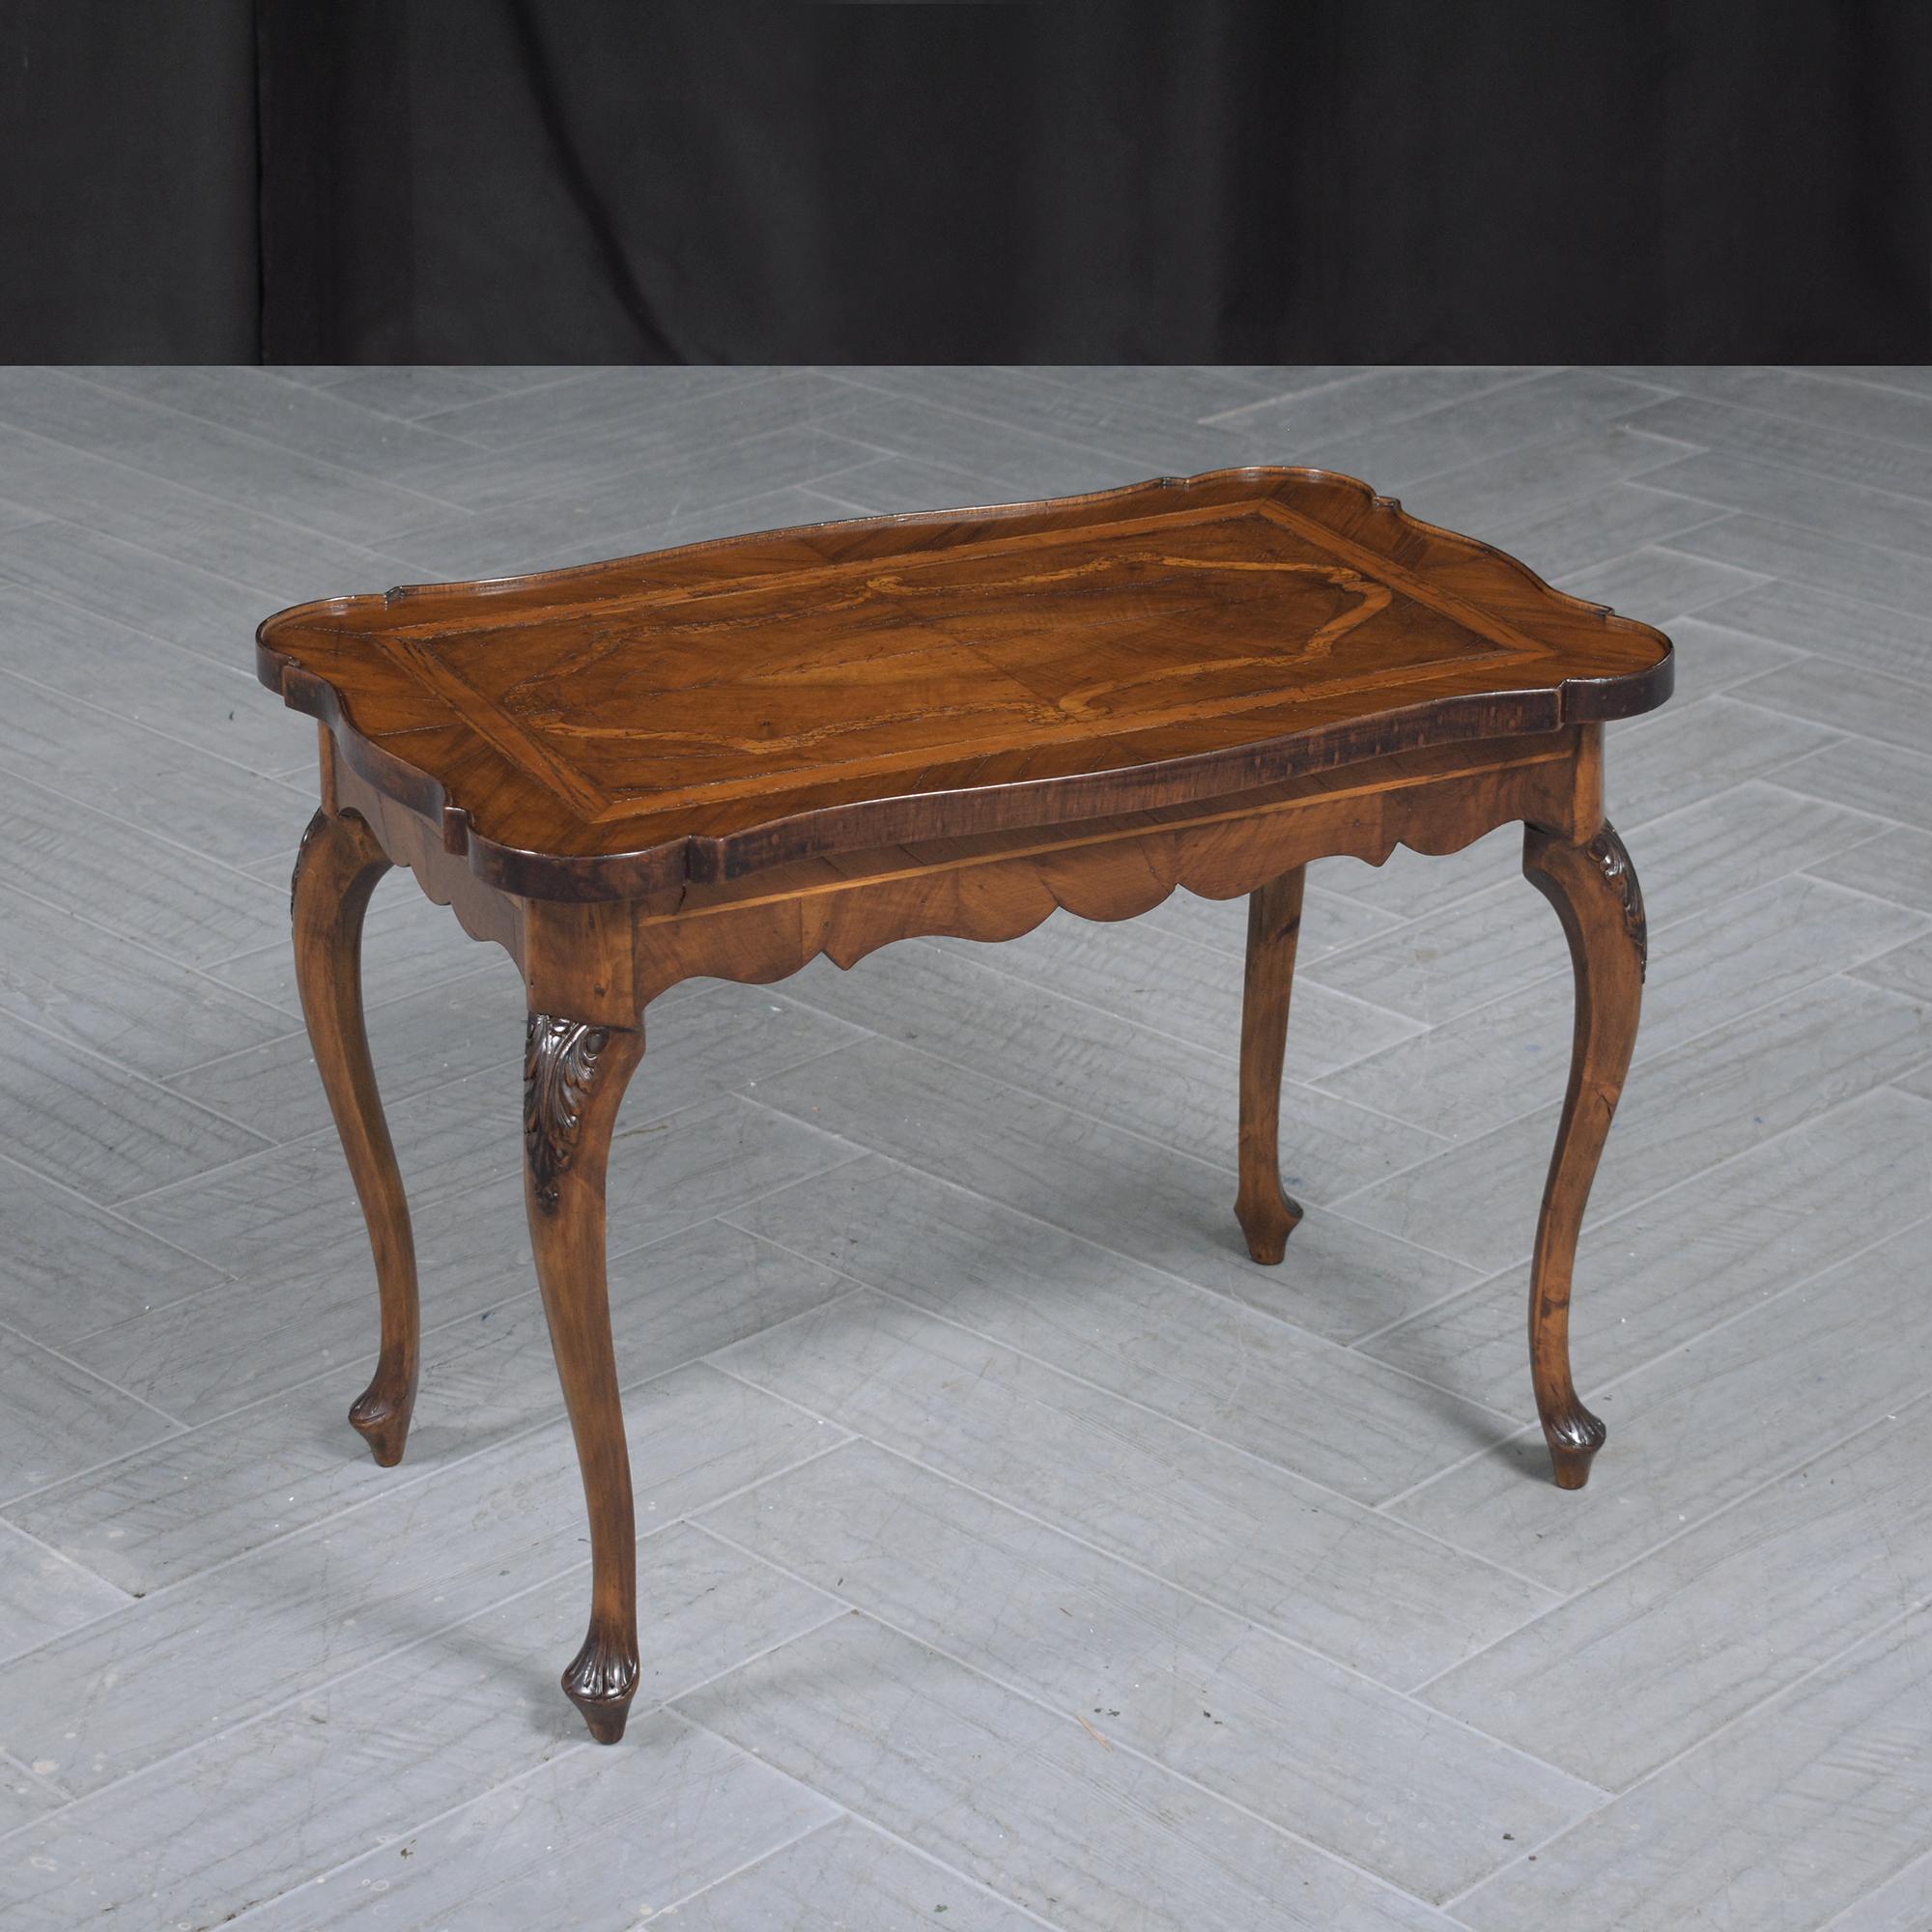 Step into history with our exquisite late 19th-century English walnut side table, a pristine example of antique craftsmanship and design. This impeccable table, expertly restored by our artisanal team, beams in its original walnut shade, further